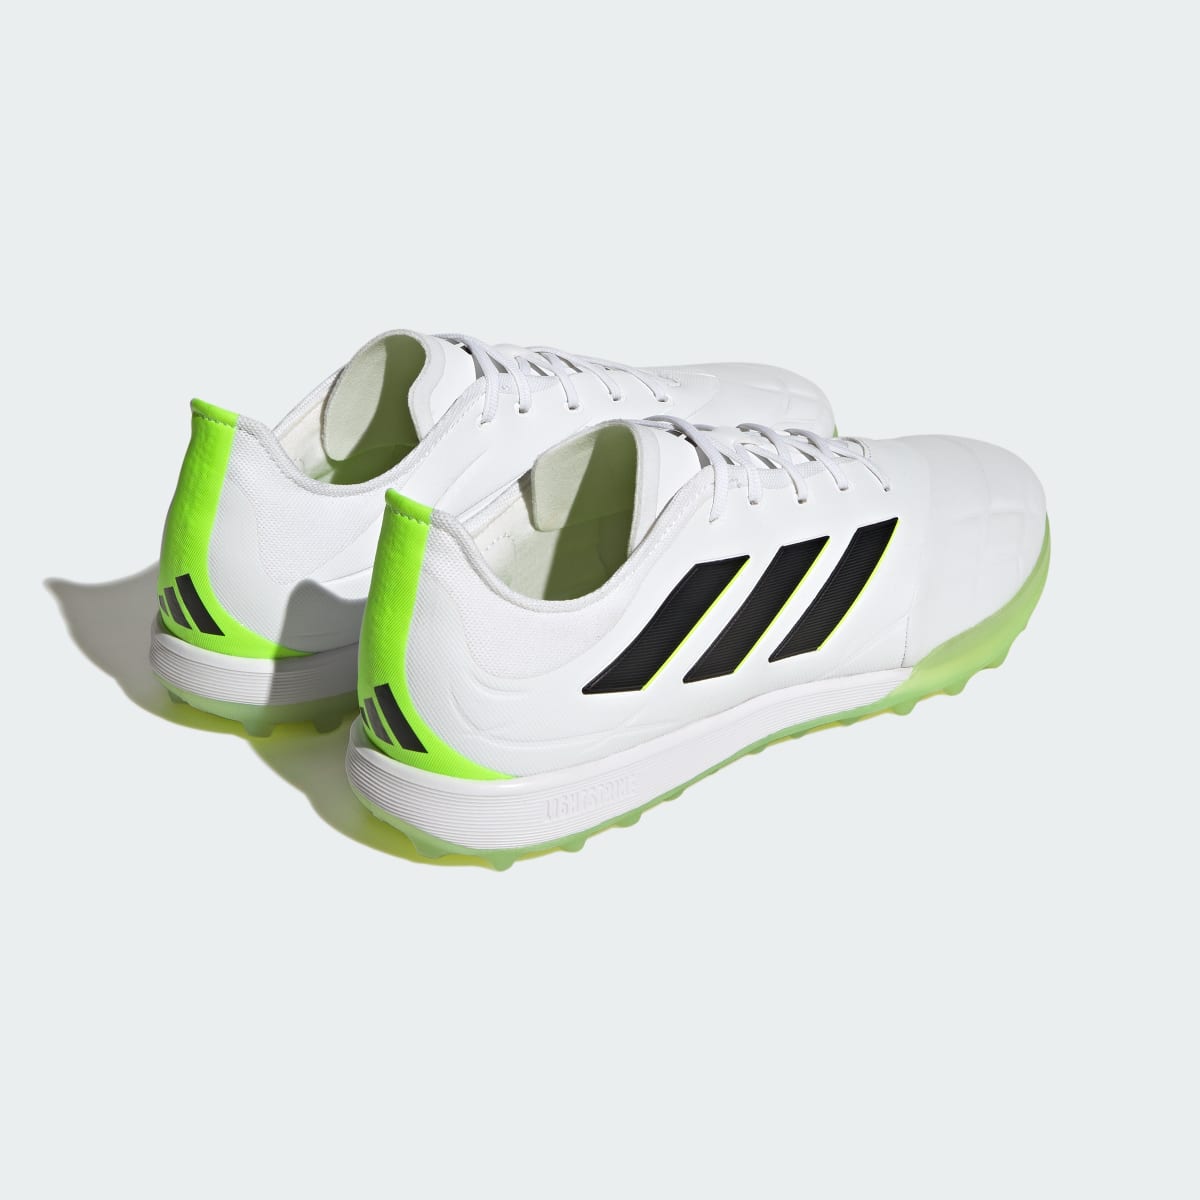 Adidas Copa Pure.1 Turf Boots. 9